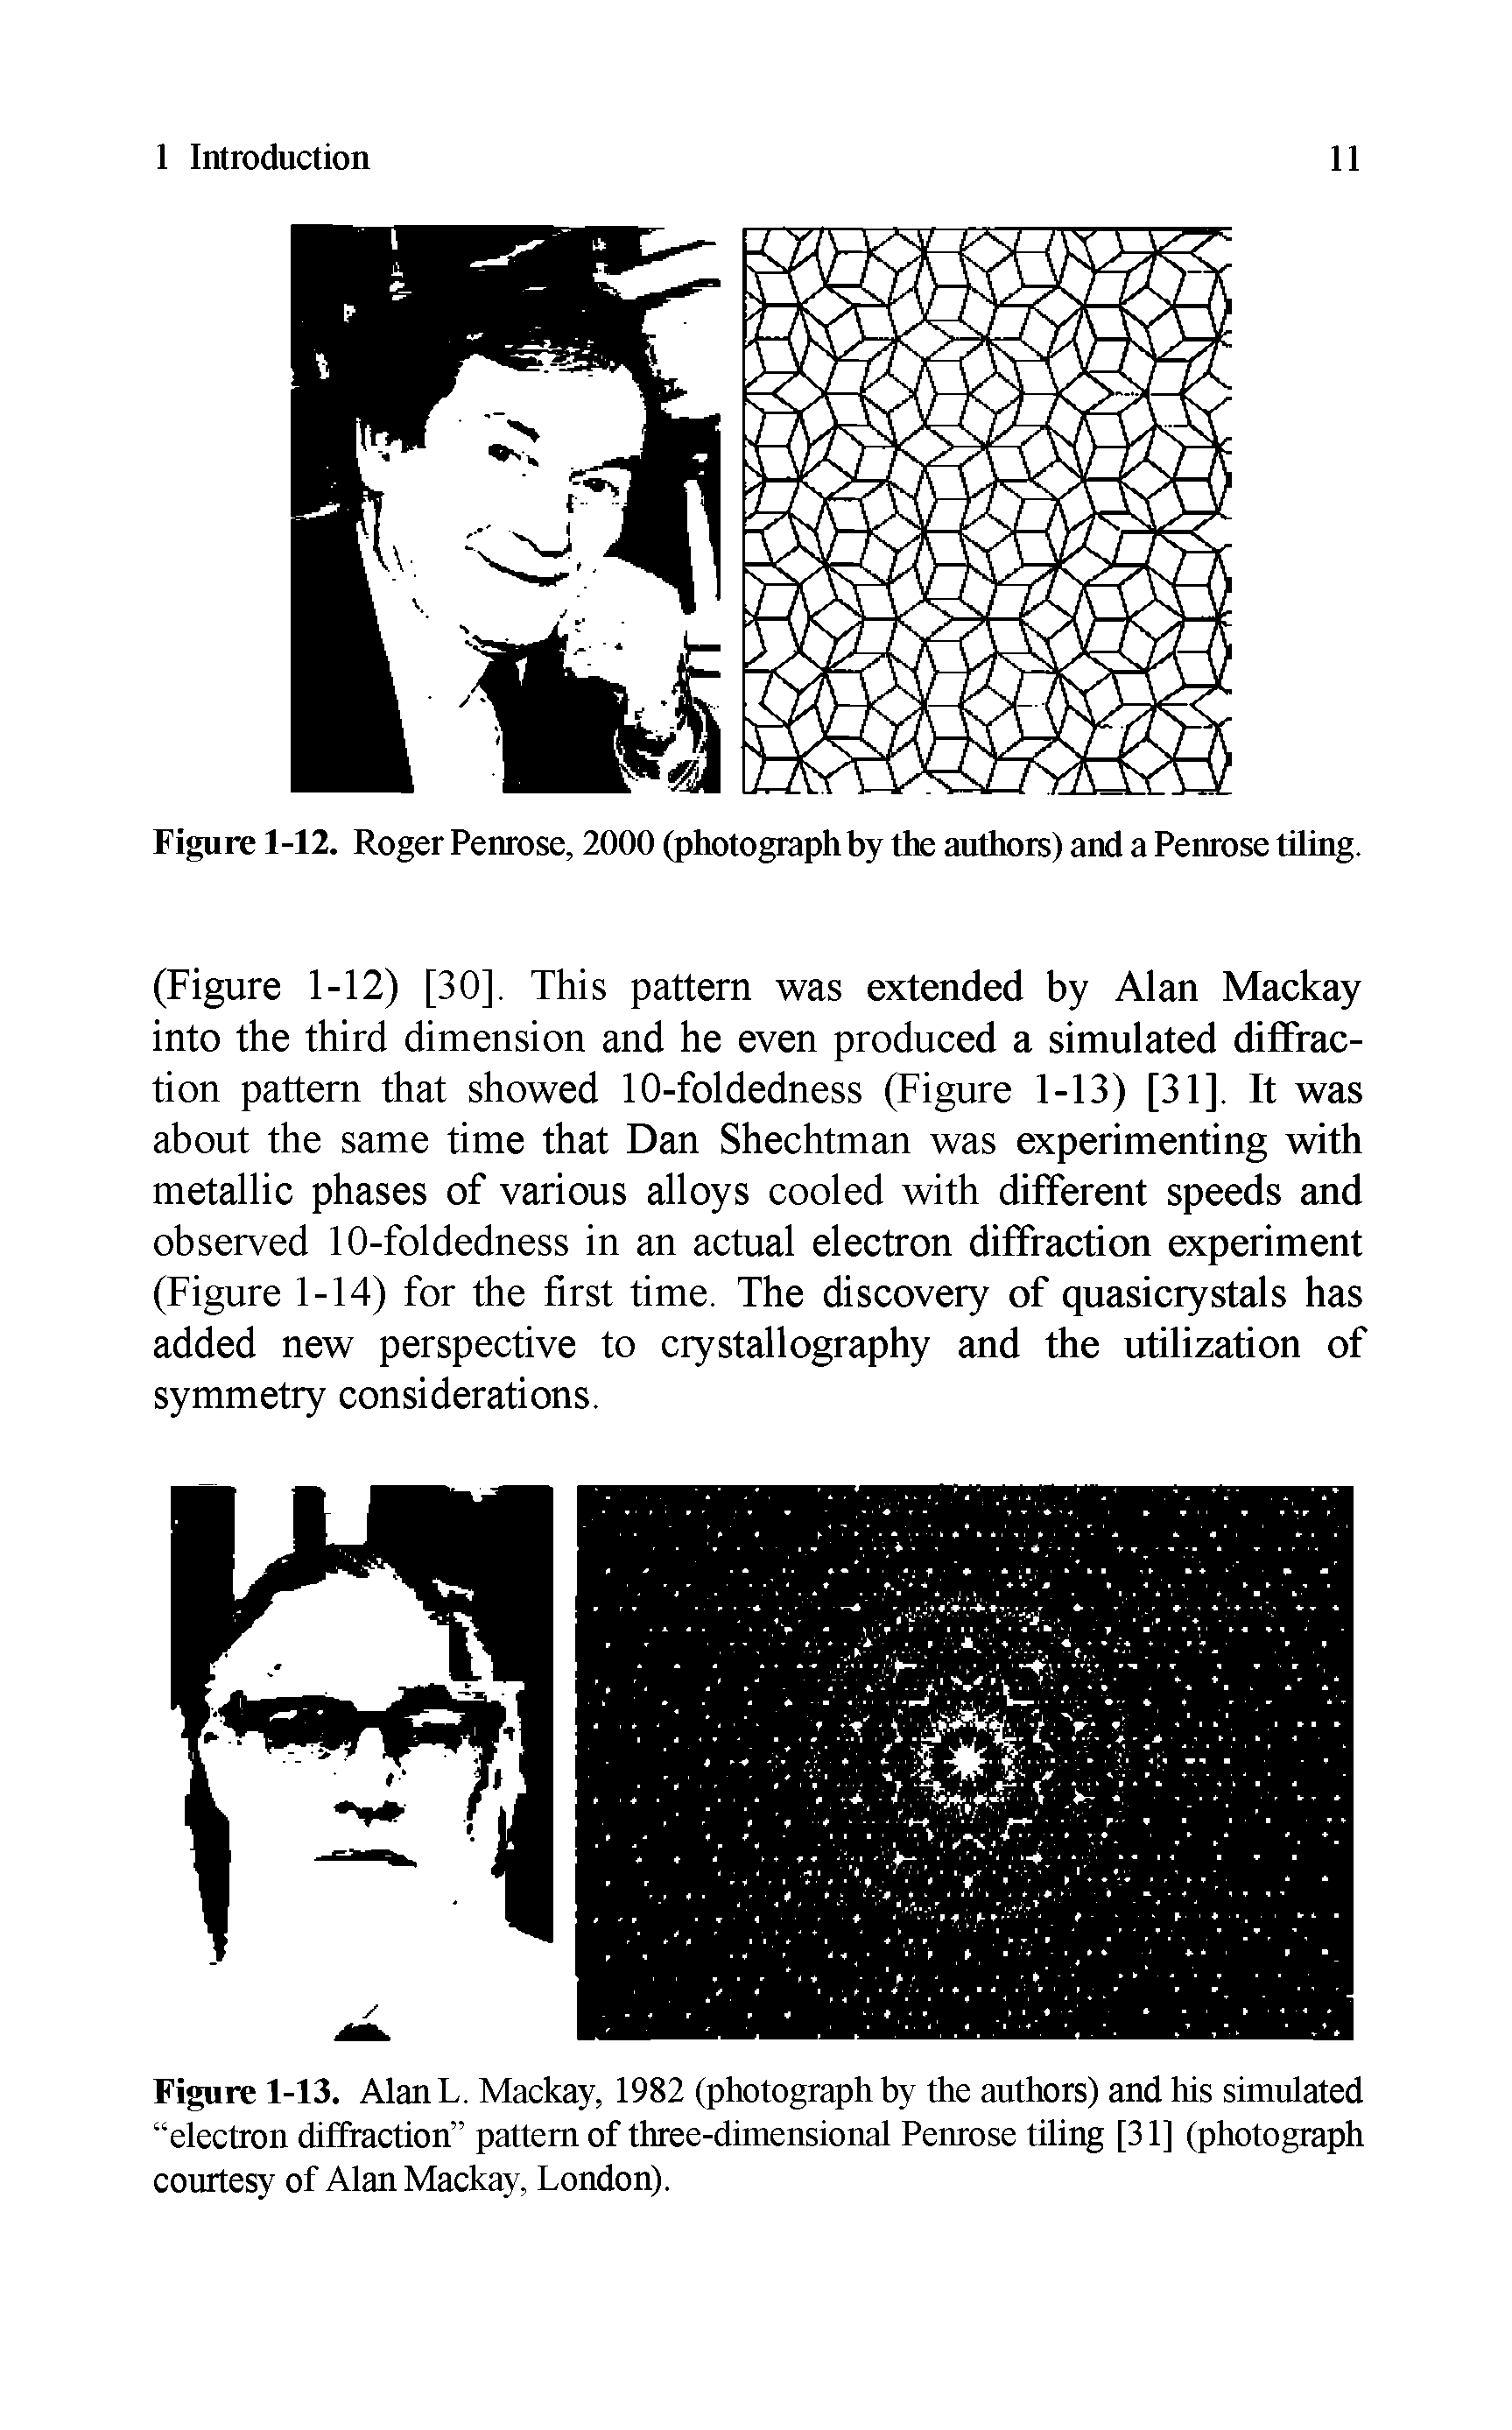 Figure 1-12. Roger Penrose, 2000 (photograph by the authors) and a Penrose tiling.